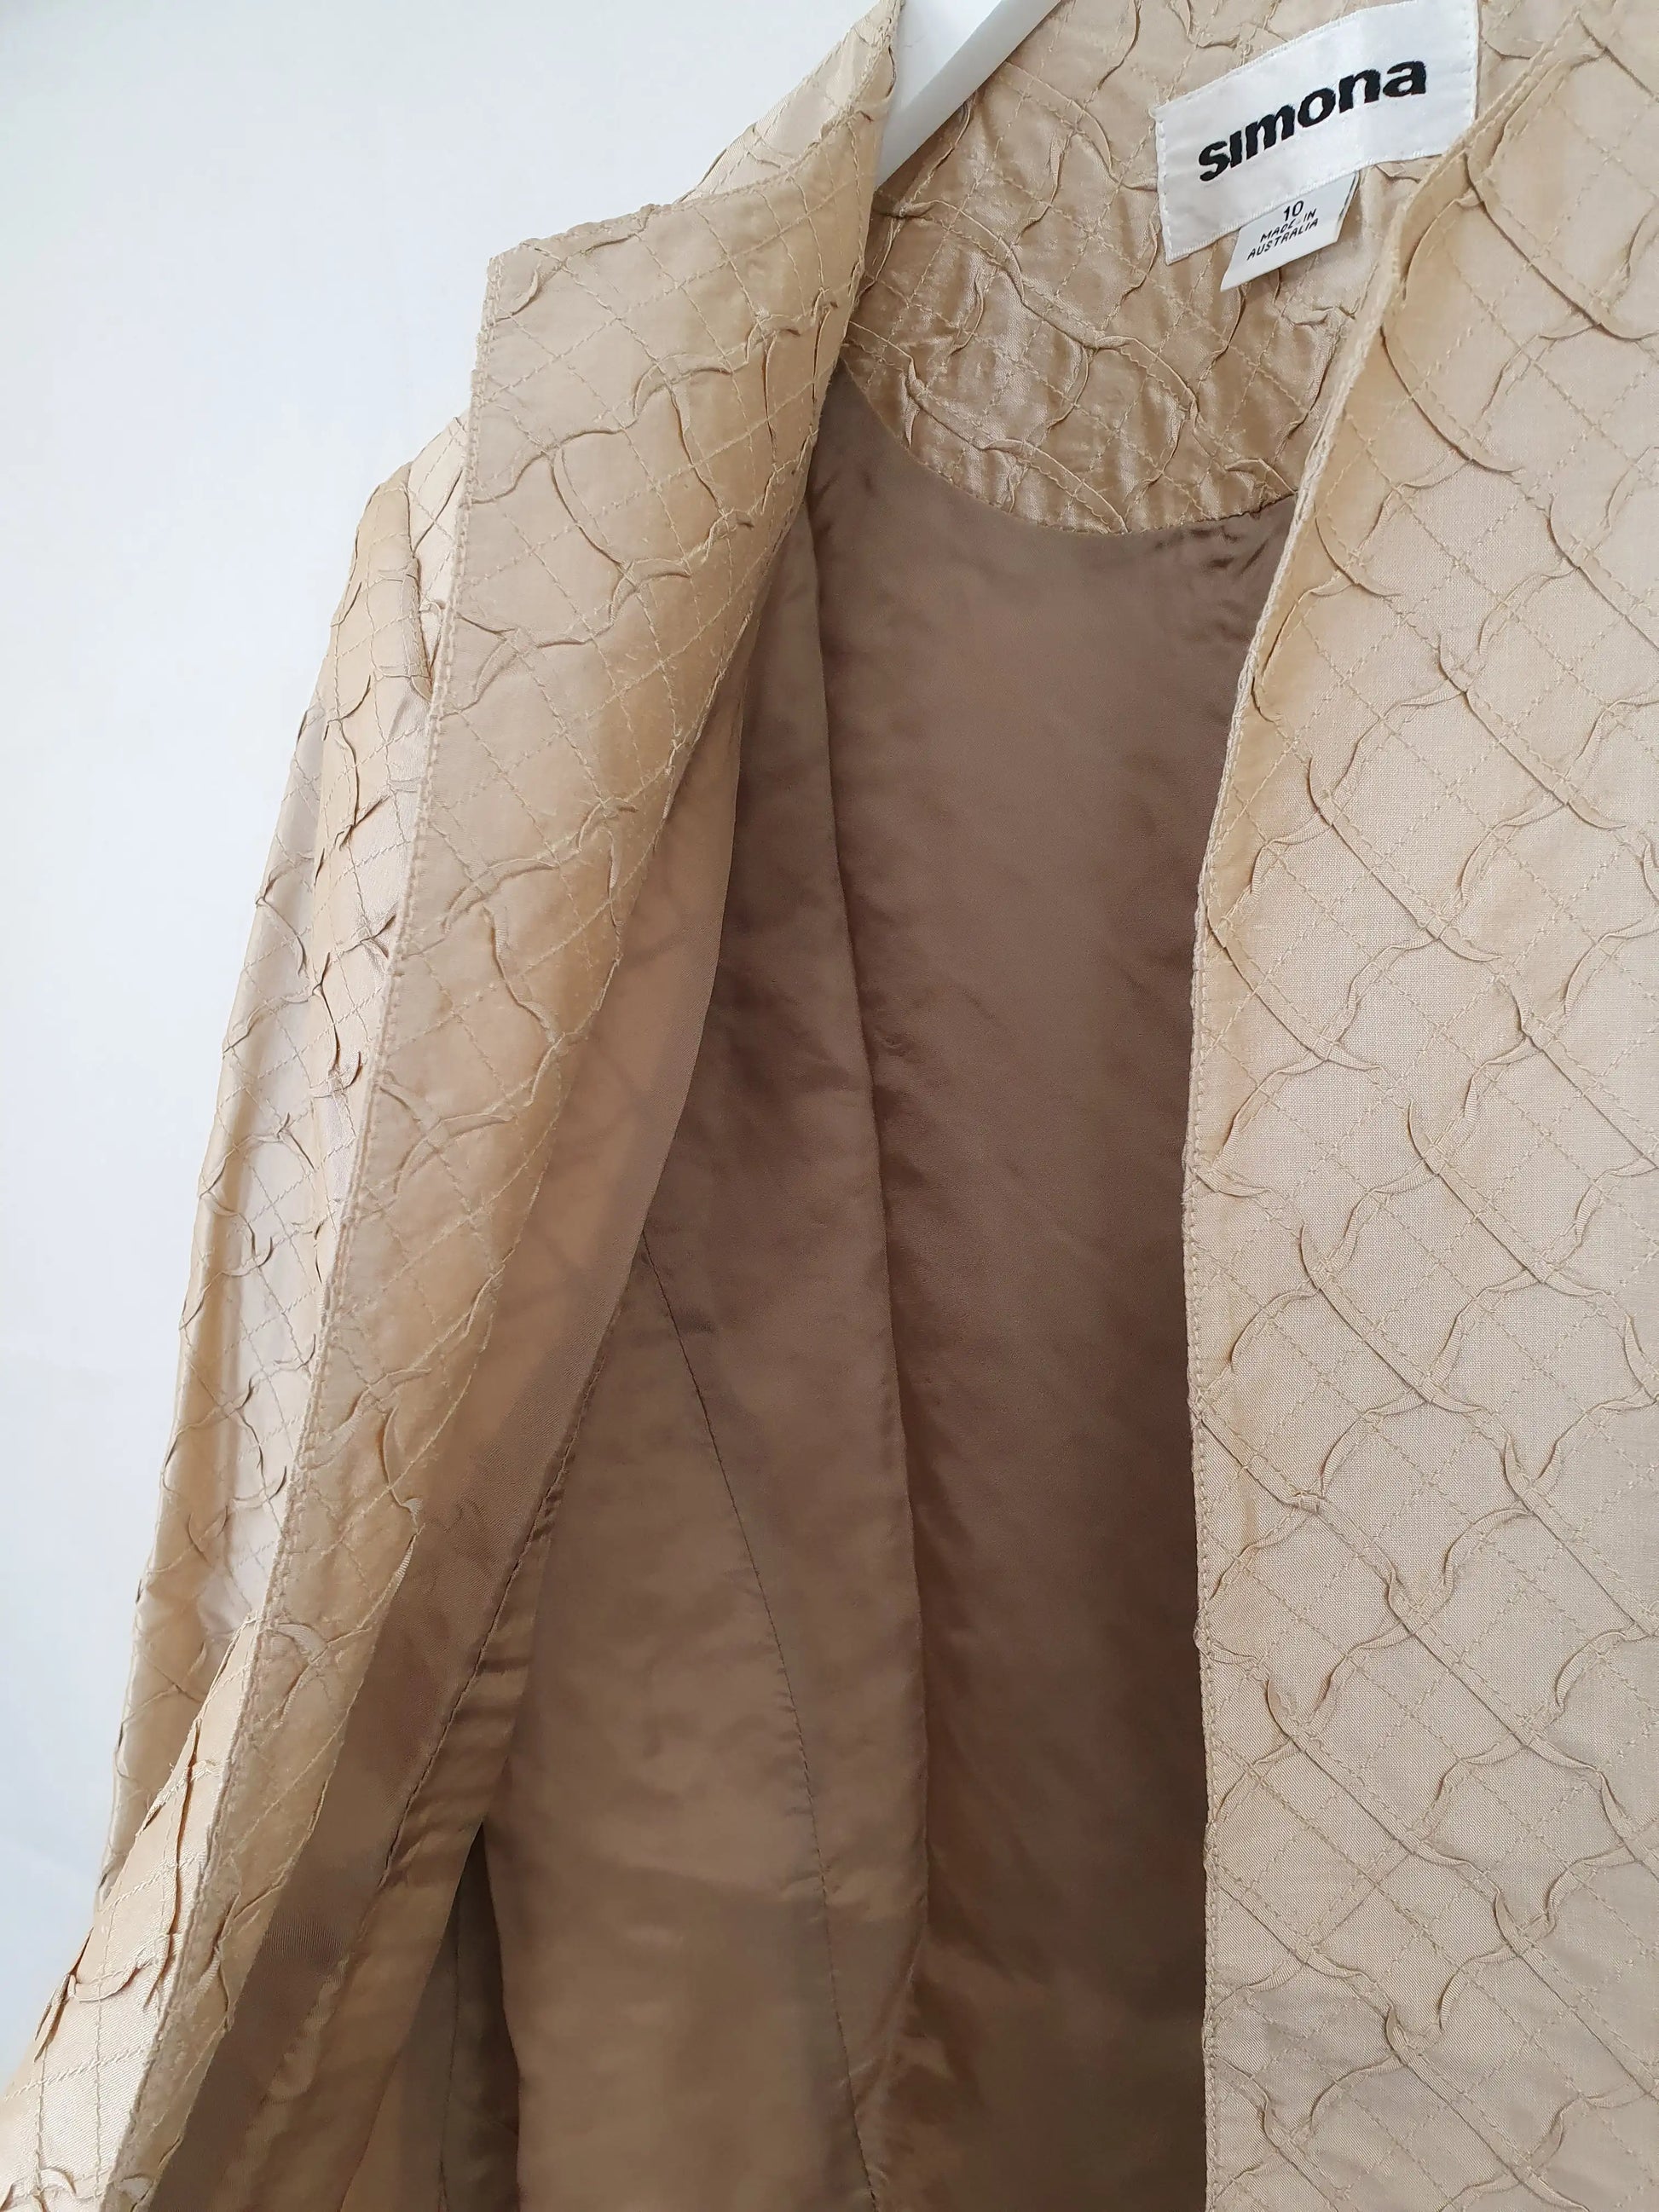 Simona Gold Patterned Silk Cardigan Size 10 by SwapUp-Second Hand Shop-Thrift Store-Op Shop 